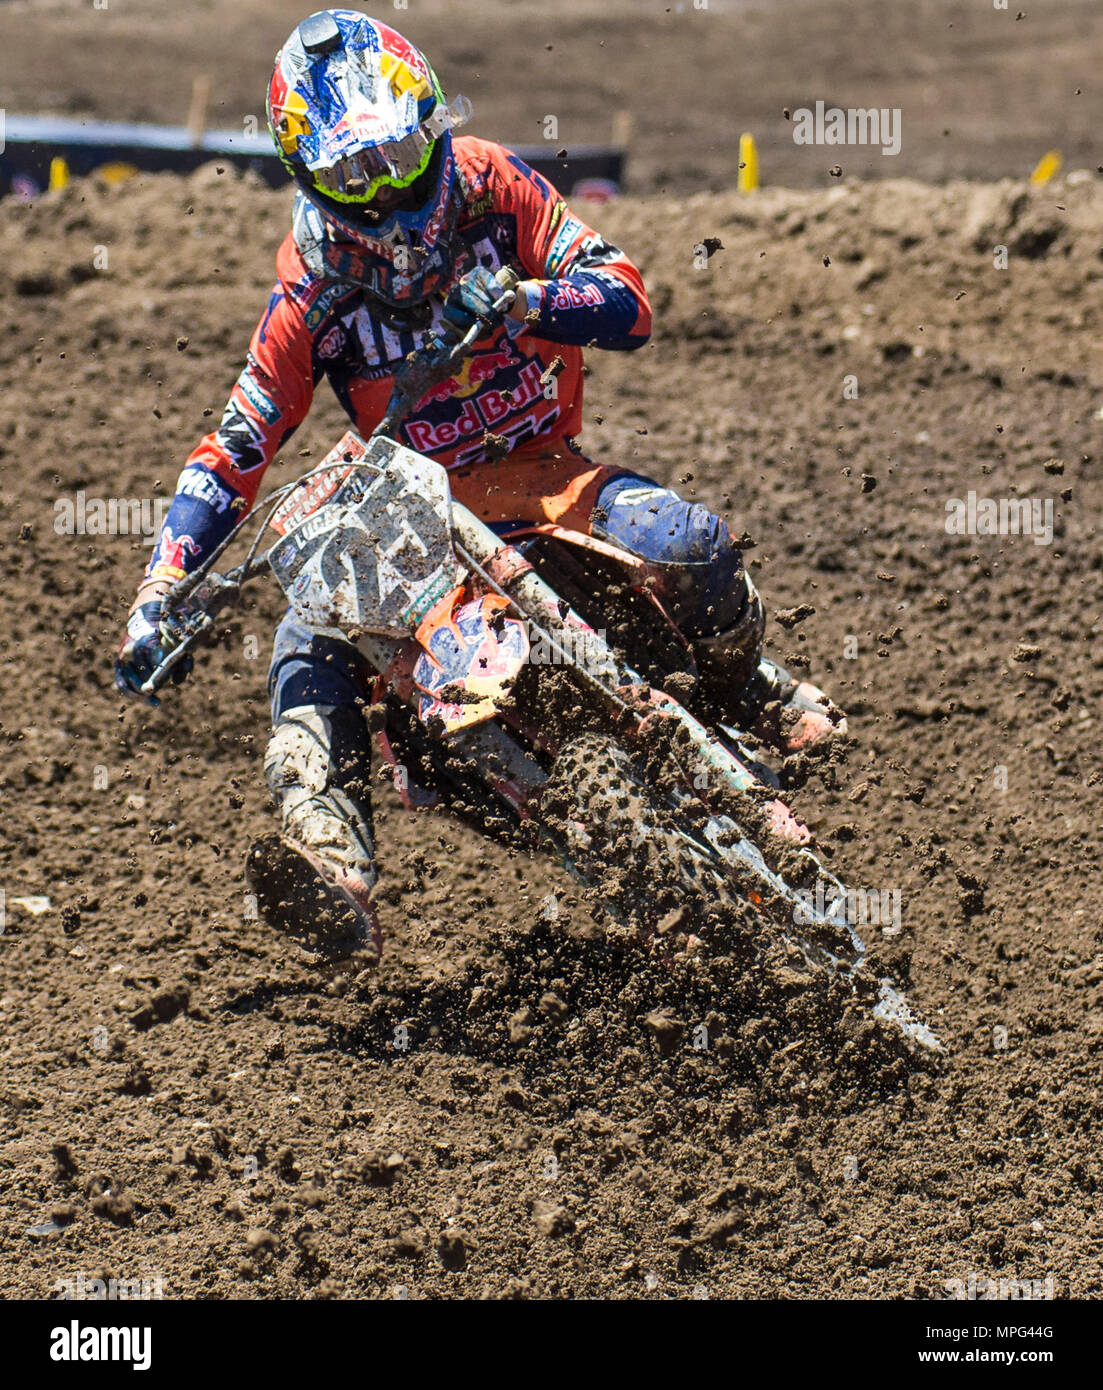 Rancho Cordova, CA. 19th May, 2018. # 25 Marvin Musquin led deep into both  motos, but had to settle for the runner-up spot during the Lucas Oil Pro  Motocross Championship 450cc class